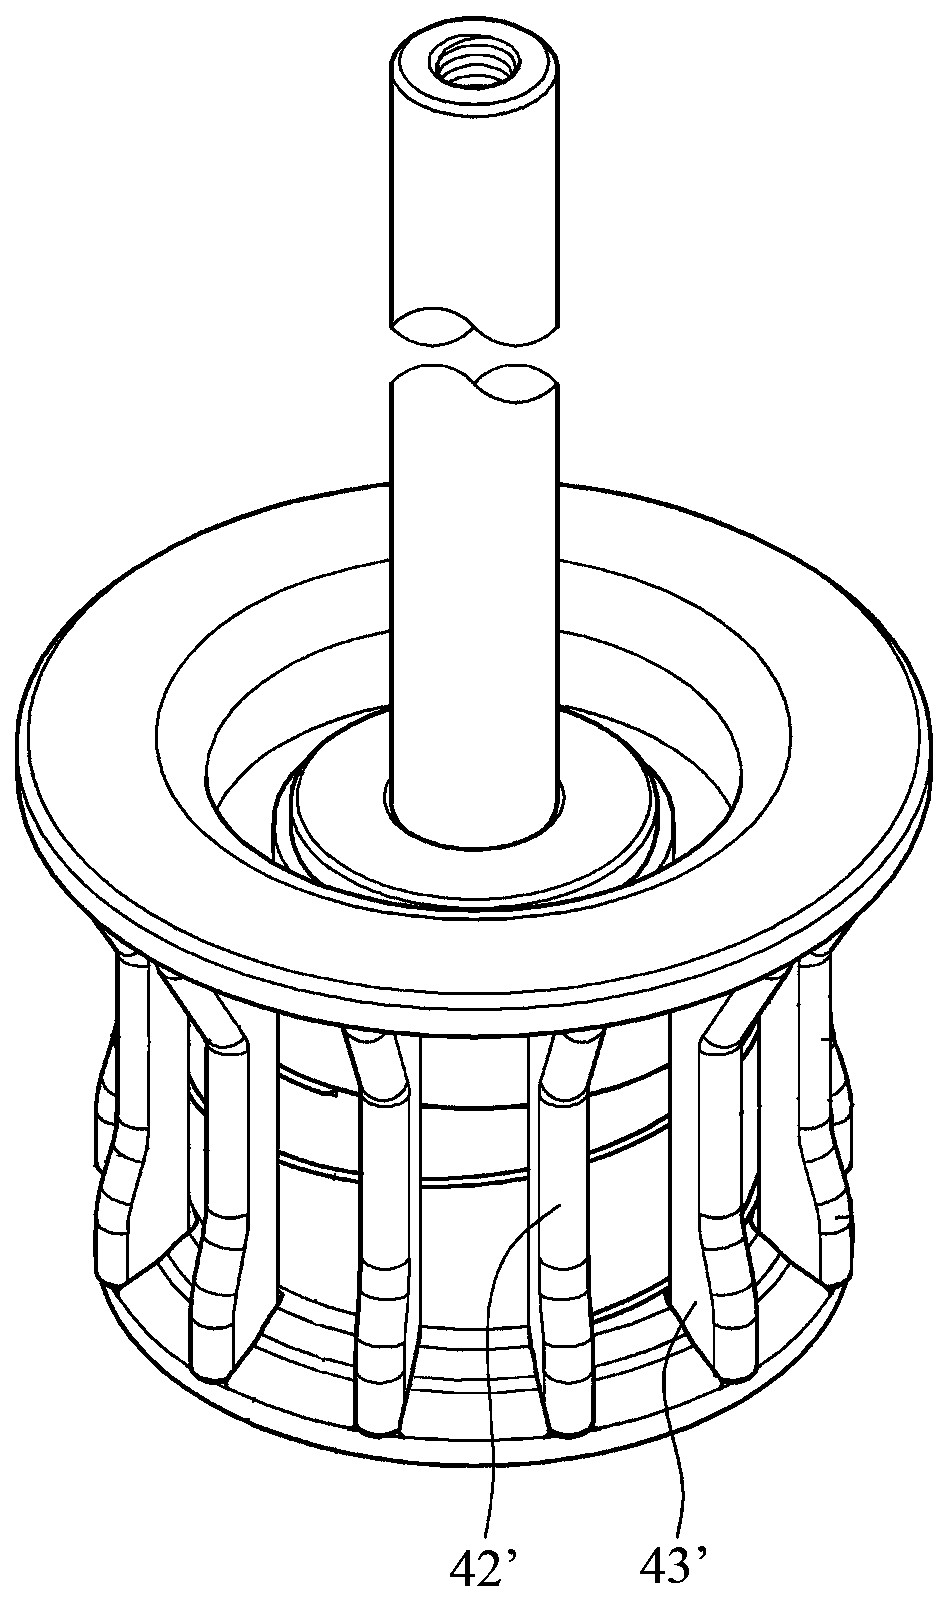 An improved ceramic rod for the lower wheel of the yarn storage wheel, the lower wheel of the yarn storage wheel and the yarn storage wheel